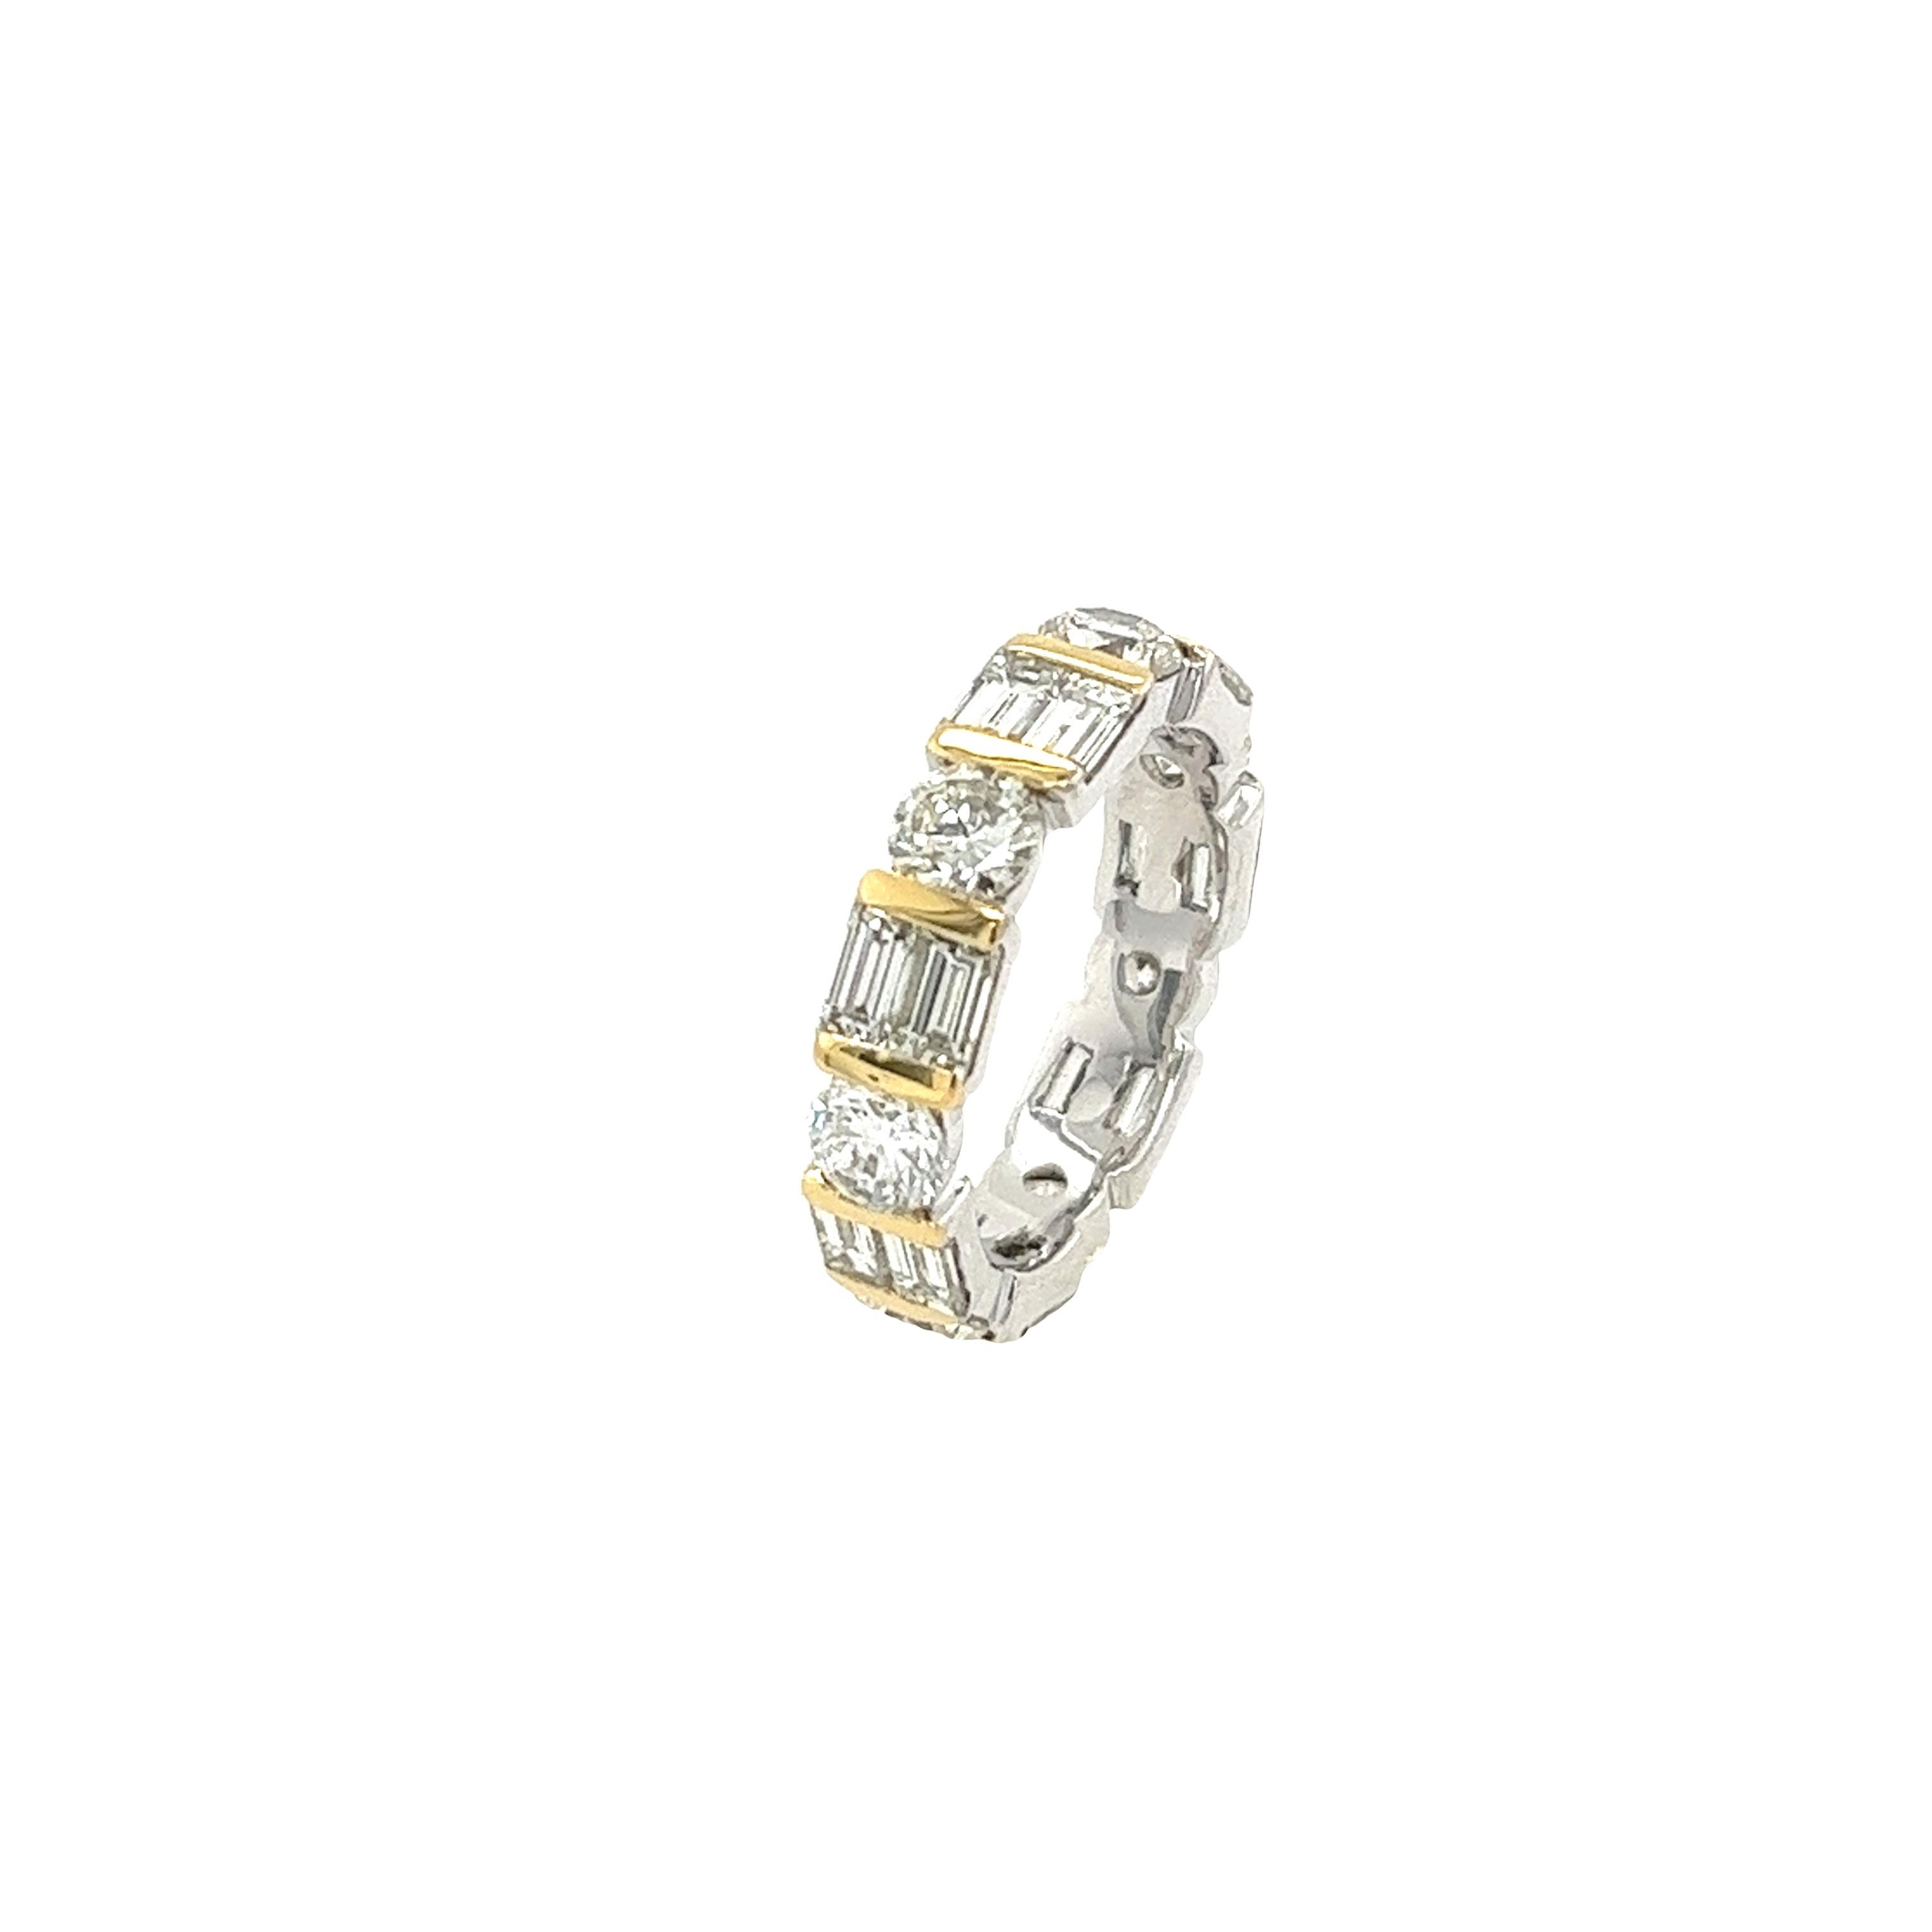 14ct White &Yellow Gold Diamond Full eternity ring set with 7 Round &14 baguette 1